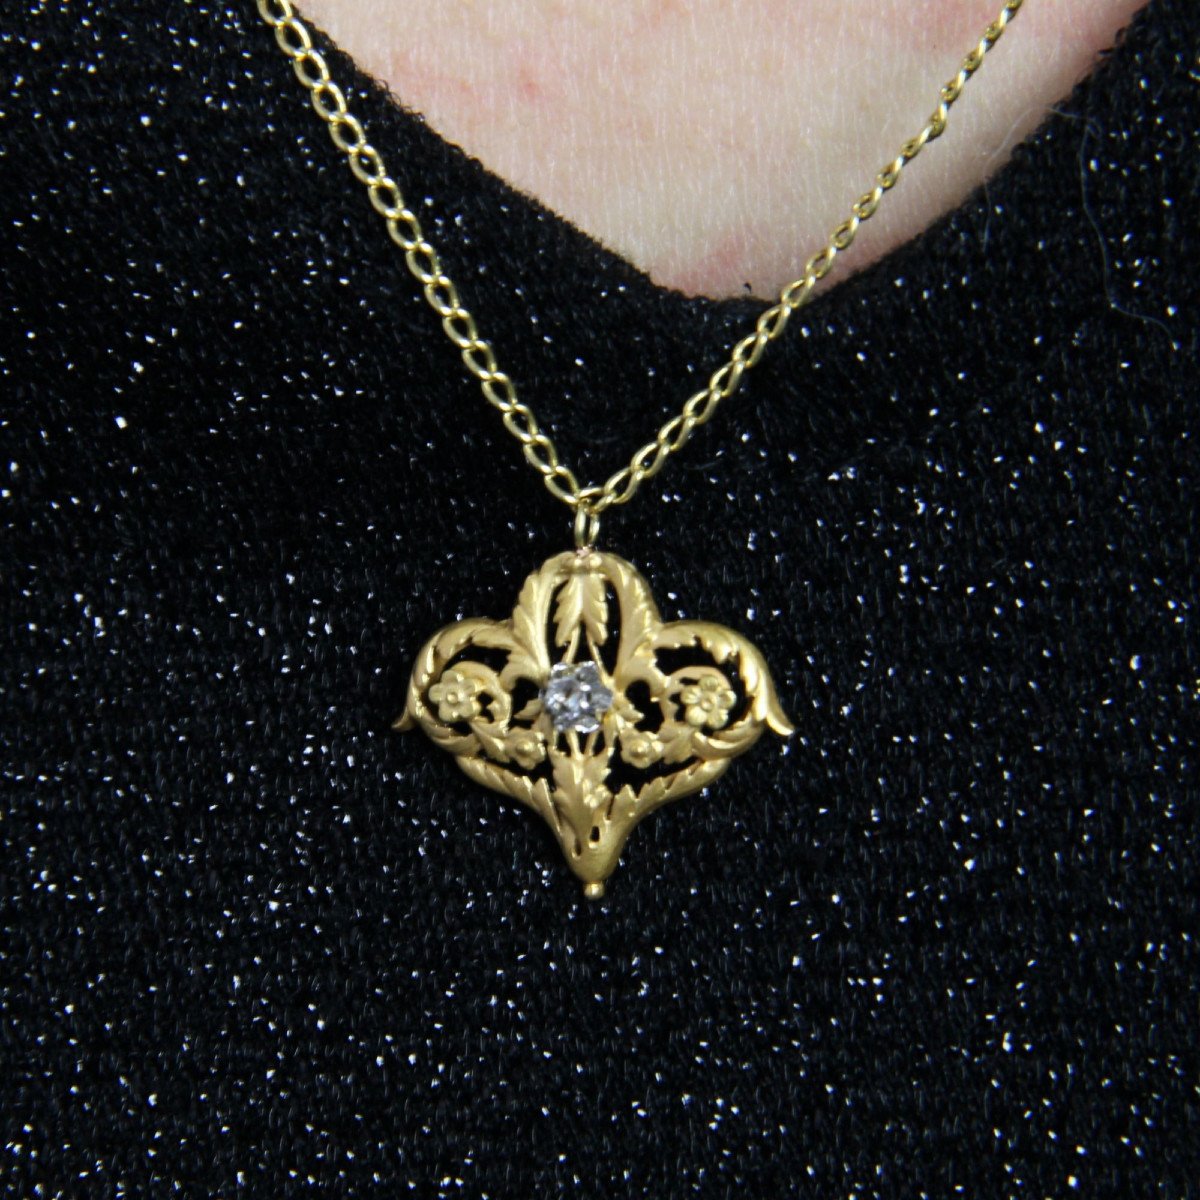 Old Chain And Its Arabesque And Rose-cut Diamond Pendant-photo-2